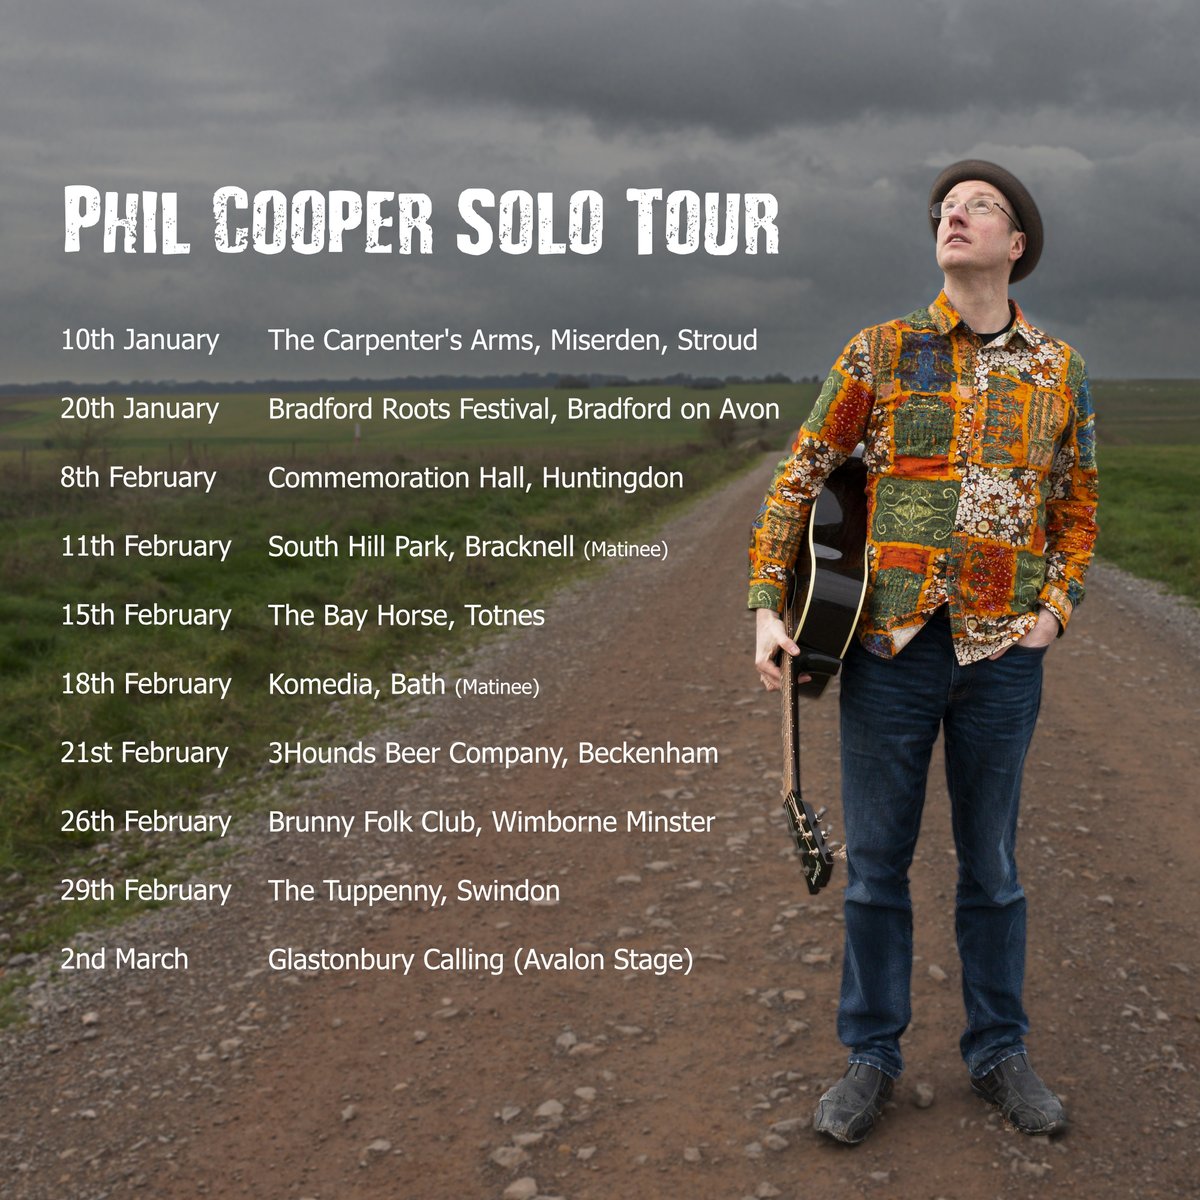 We'll be announcing our spring tour dates soon, but in the meantime, we wanted to tell you that our Phil will be hitting the road for a few solo dates early next year. He'll be playing several brand new songs, as well as digging in to his back catalogue.